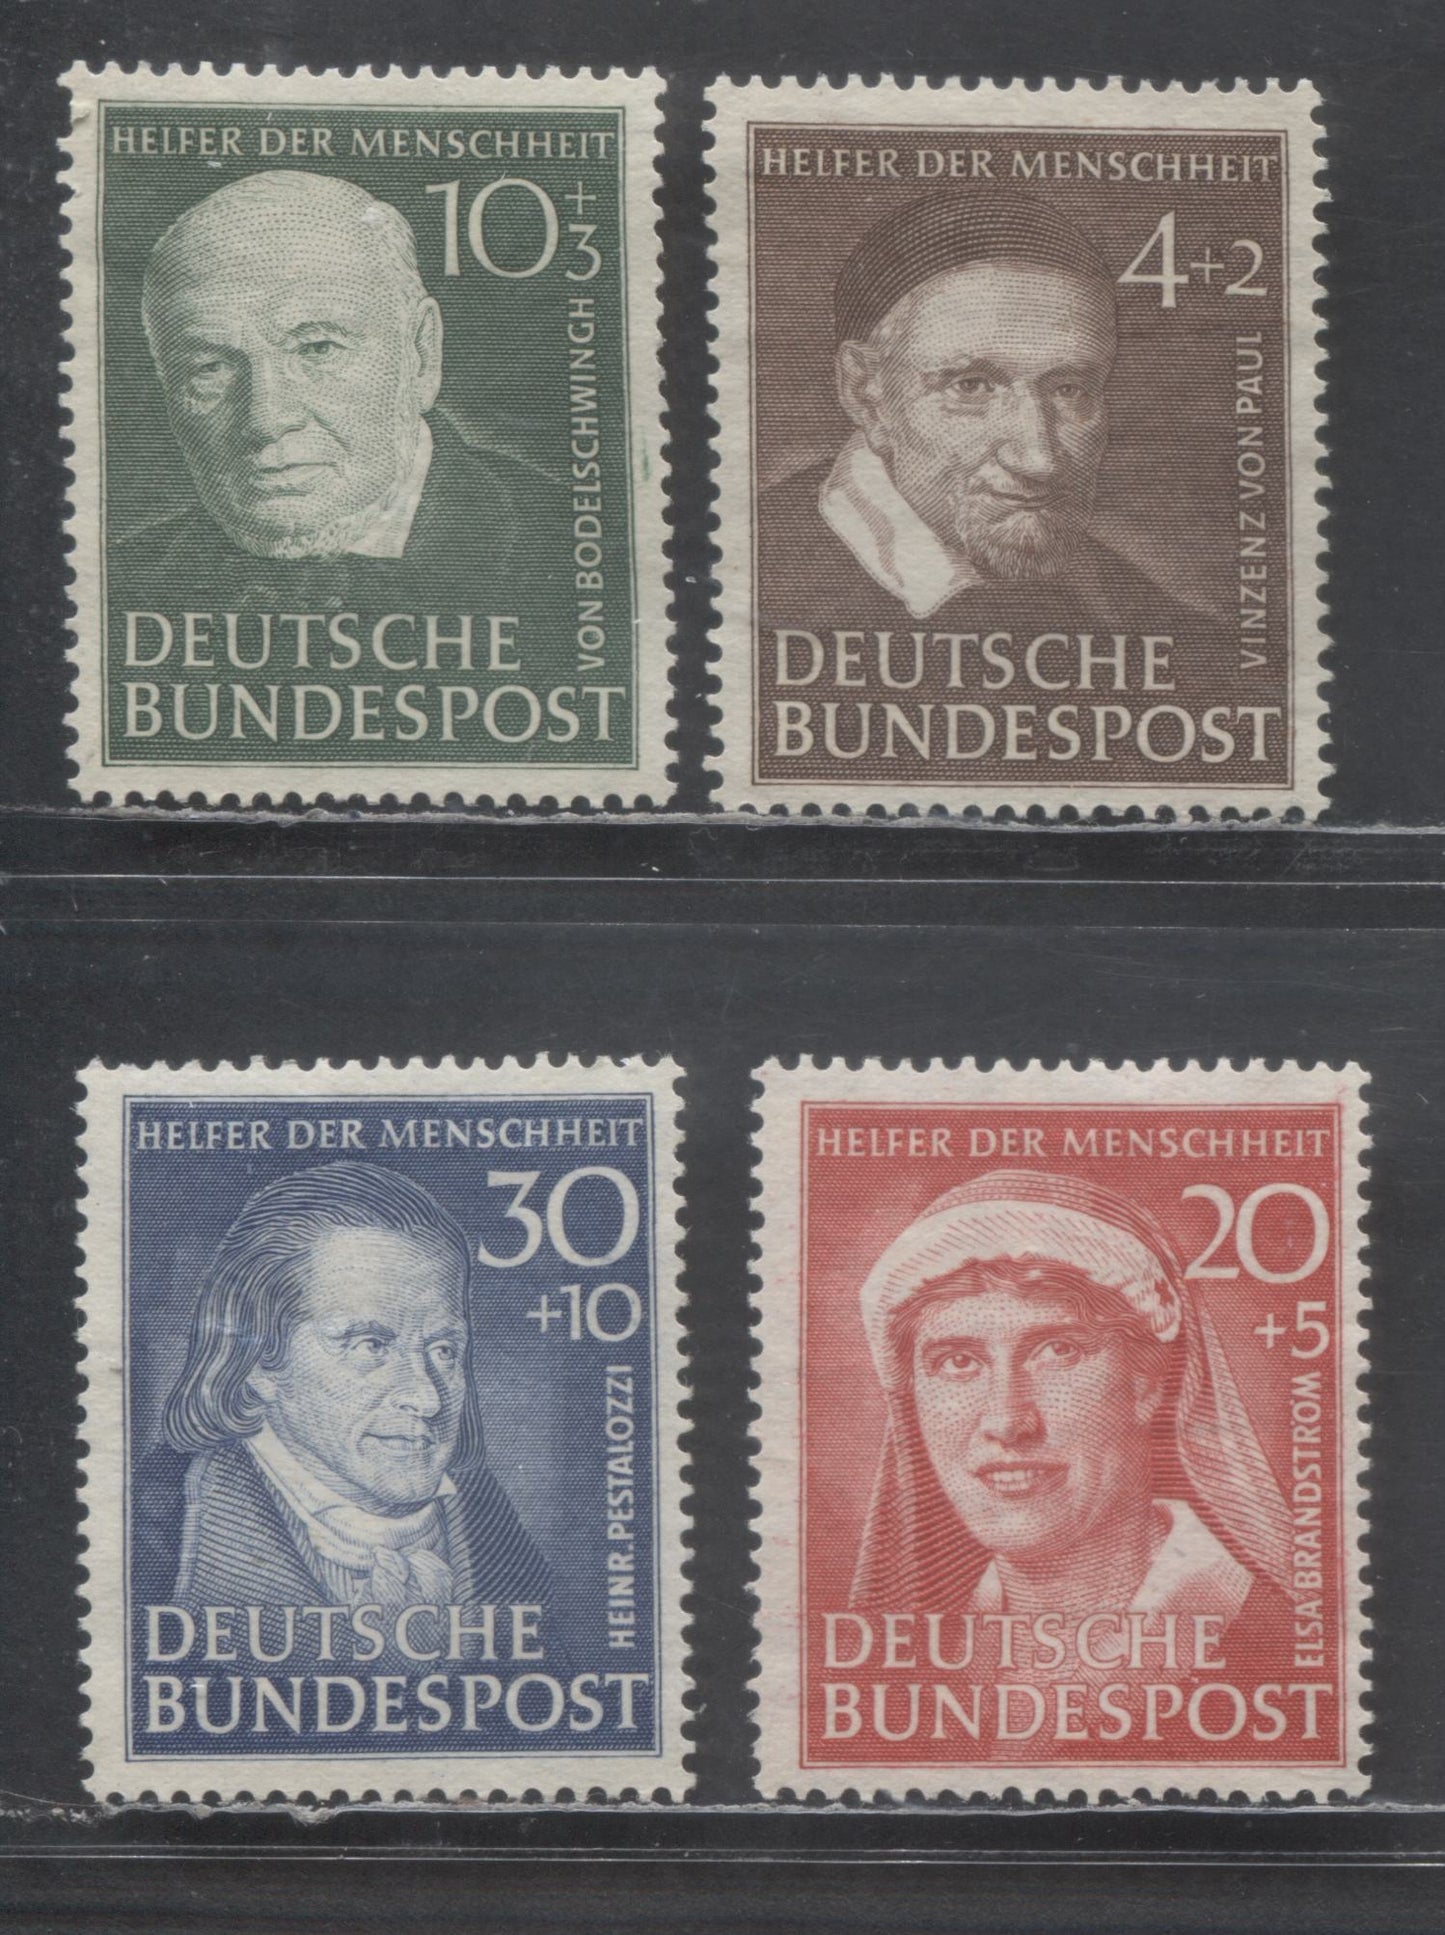 Lot 29 Germany SC#B320/B323 1951 Portrait Semi Postals, With No Gum, 4 Fine/Very Fine Unused Singles, Click on Listing to See ALL Pictures, Estimated Value $10